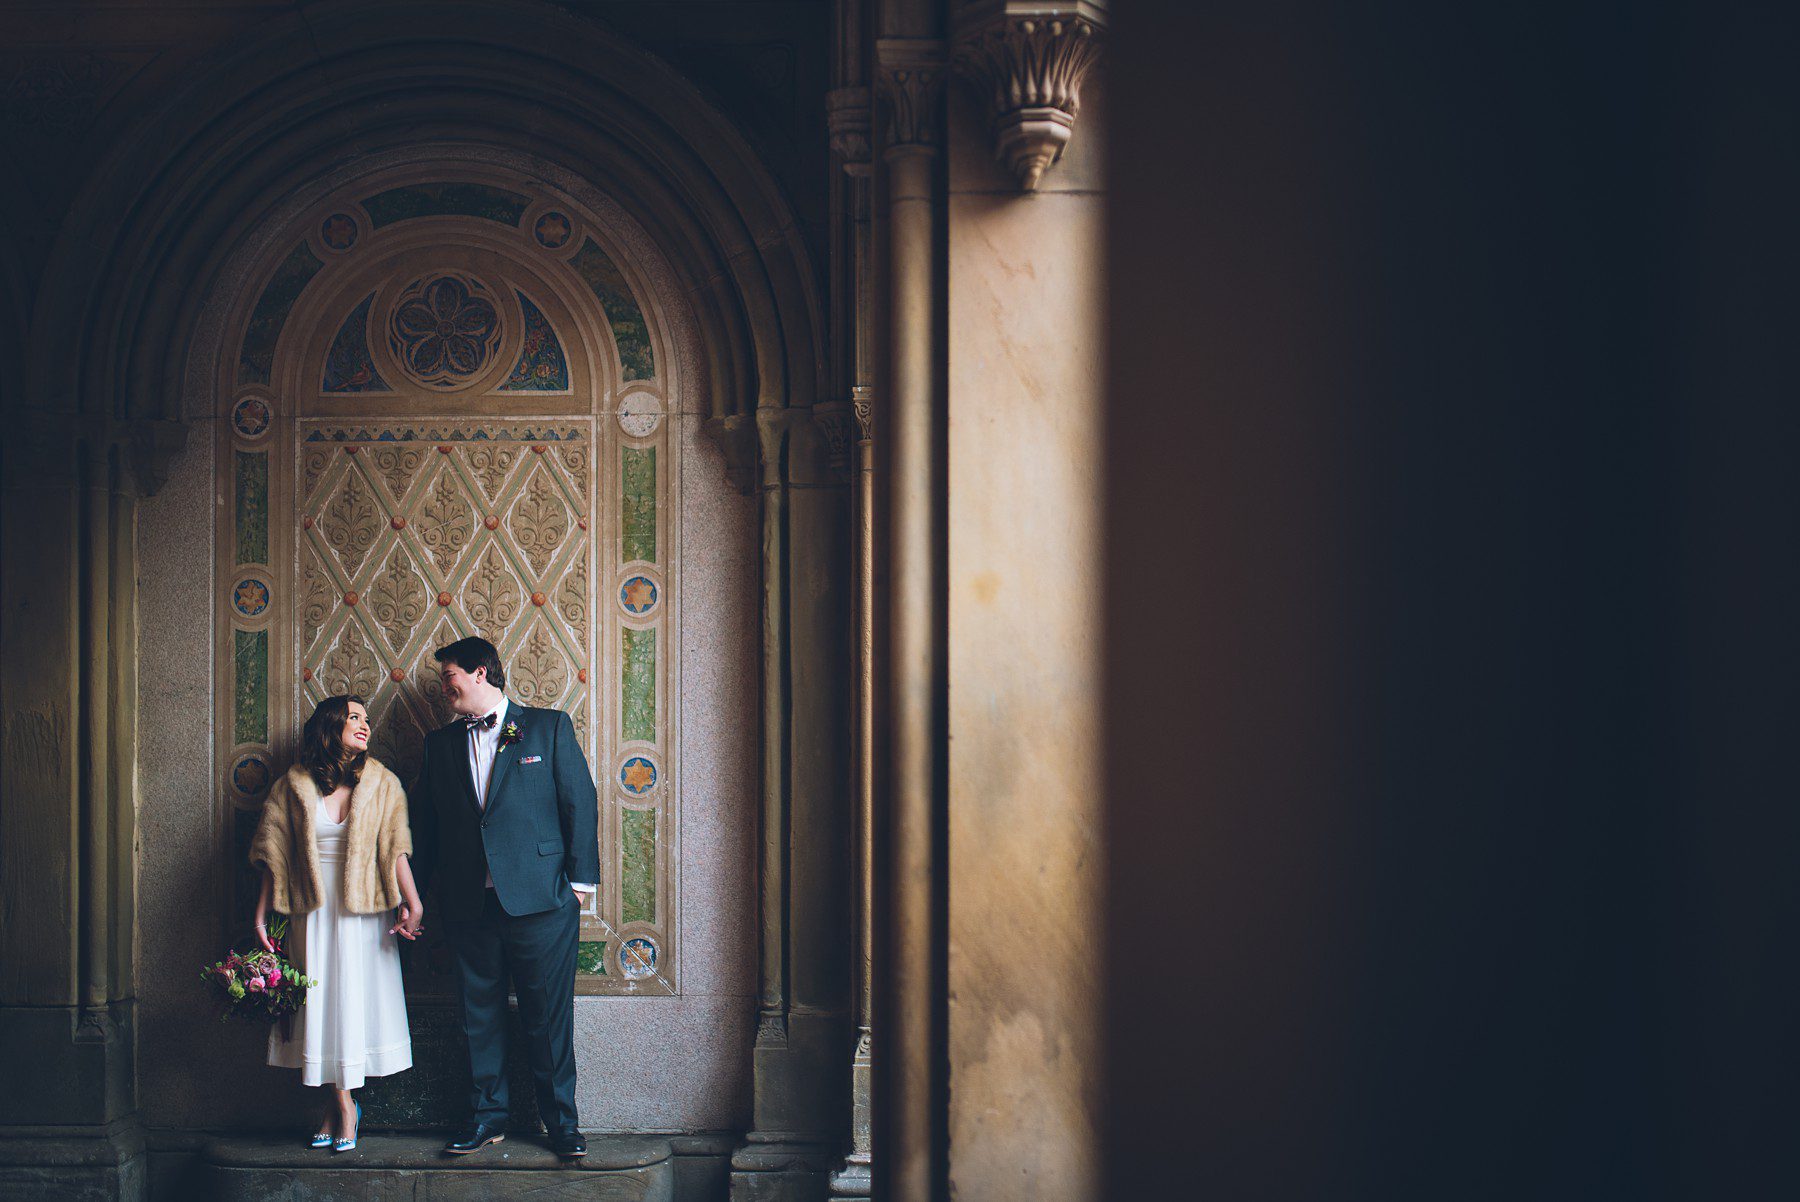 Bethesda Terrace Wedding of Whitney & Grant | A Central Park Elopement